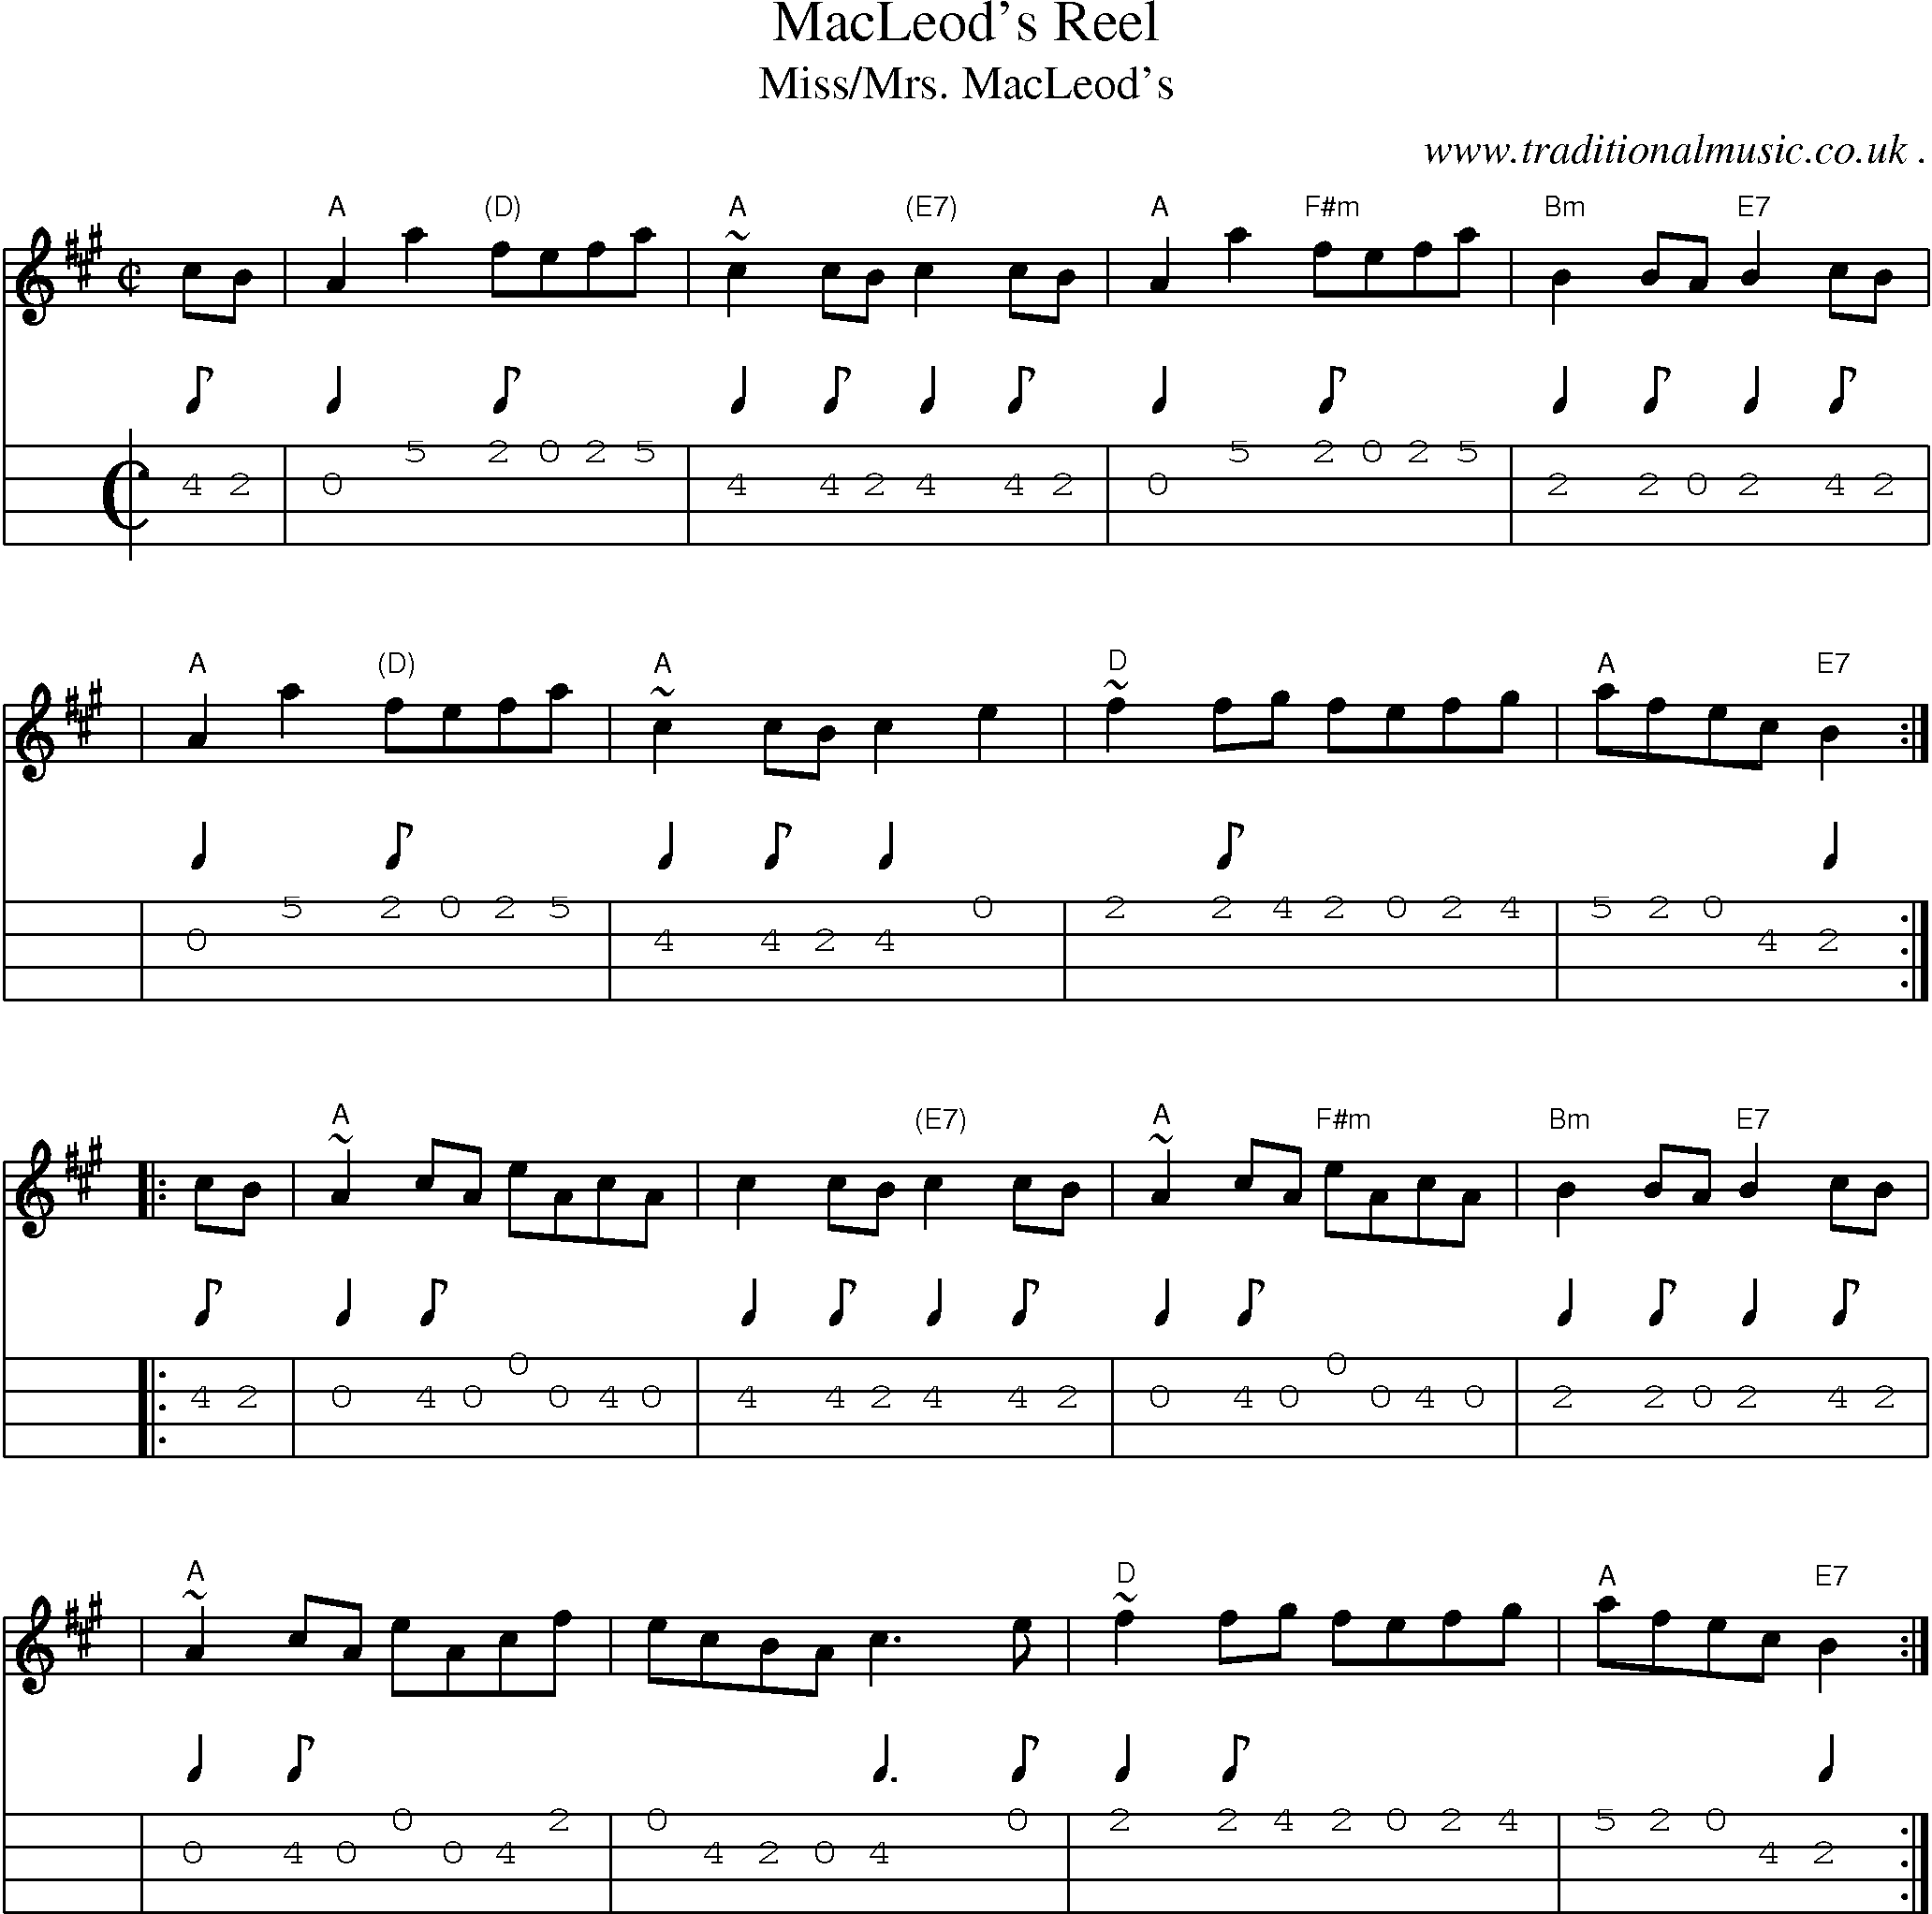 Sheet-music  score, Chords and Mandolin Tabs for Macleods Reel